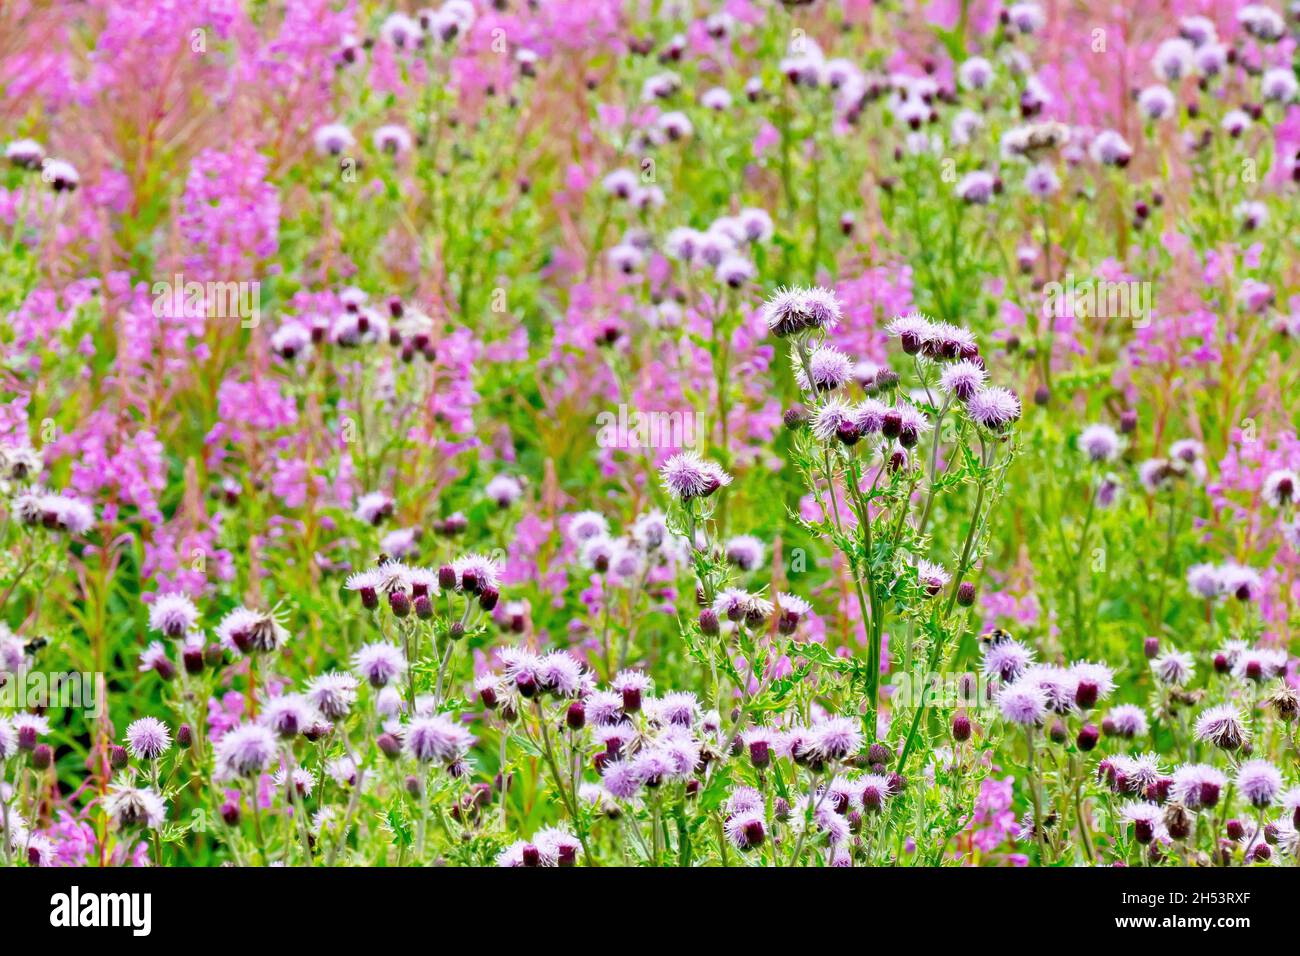 An image showing a small section of rough ground alive with wild flowers, focusing on Creeping Thistle (cirsium arvense). Stock Photo